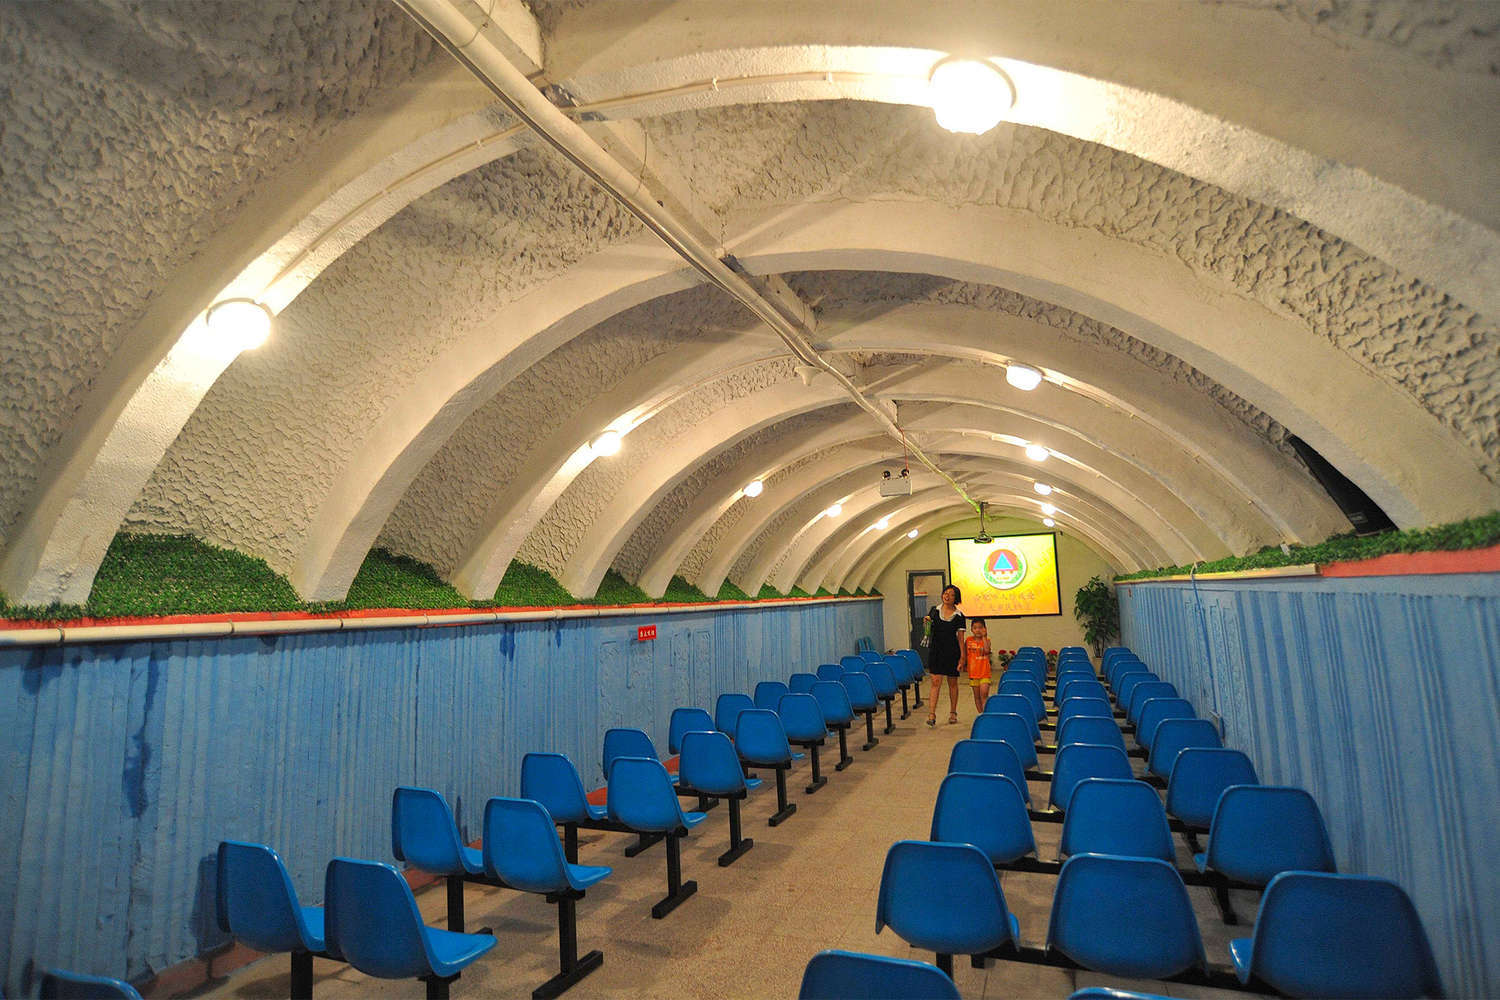 What do bomb shelters in other countries look like?